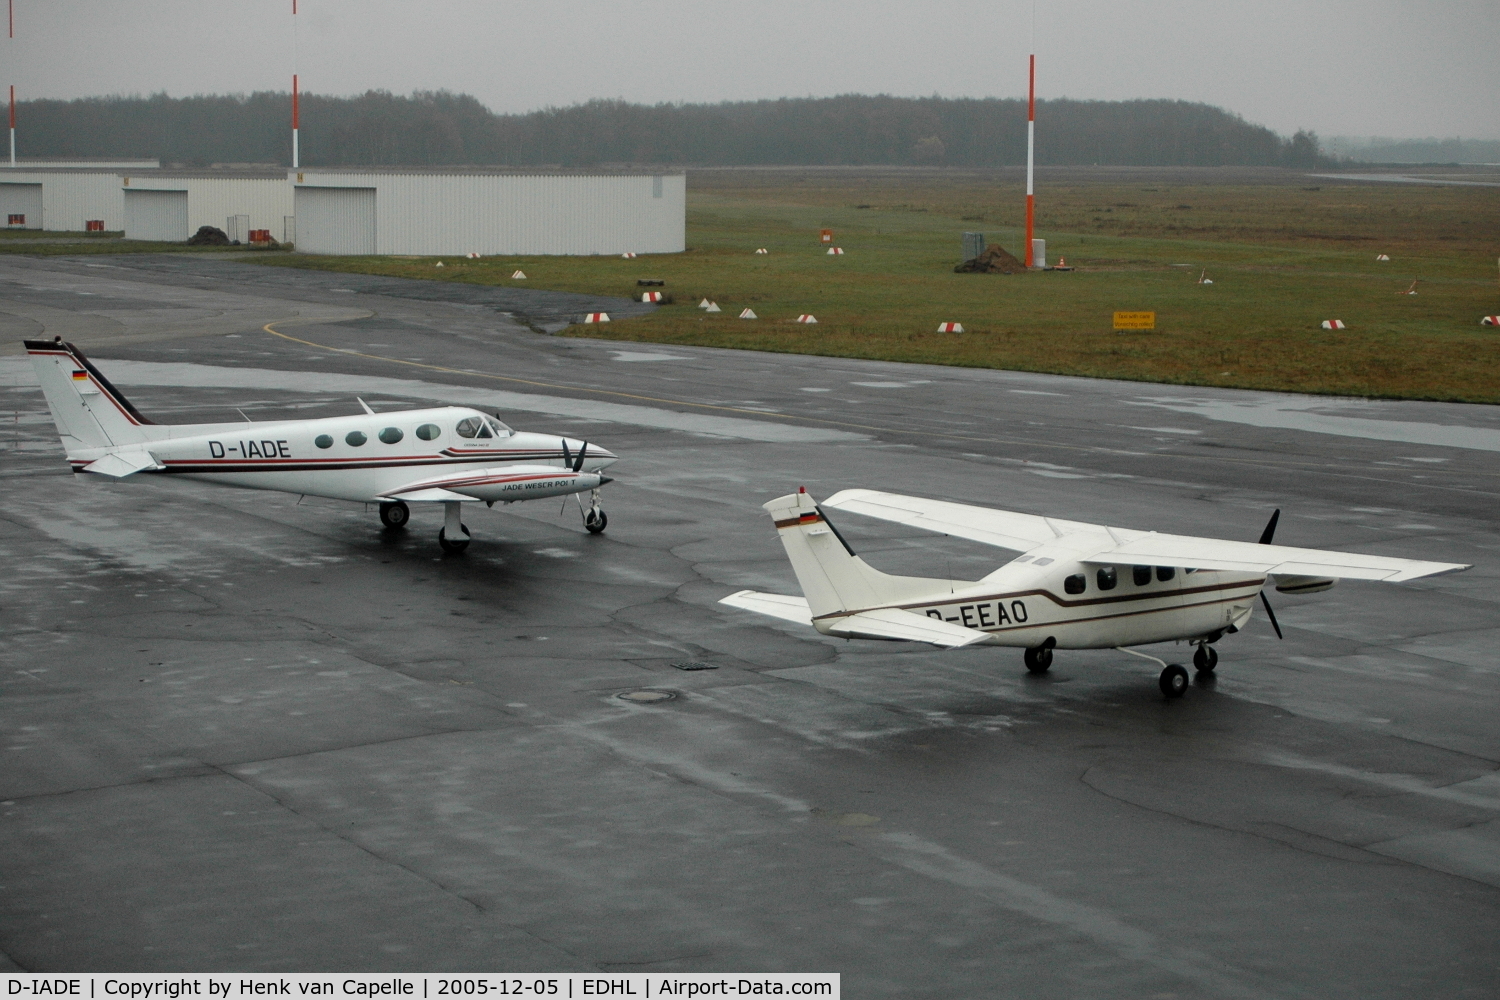 D-IADE, 1979 Cessna 340A C/N 340A-0607, Cessna 340A and a Cessna P210R Centurion parked at  Lübeck Blankensee airport, Germany.